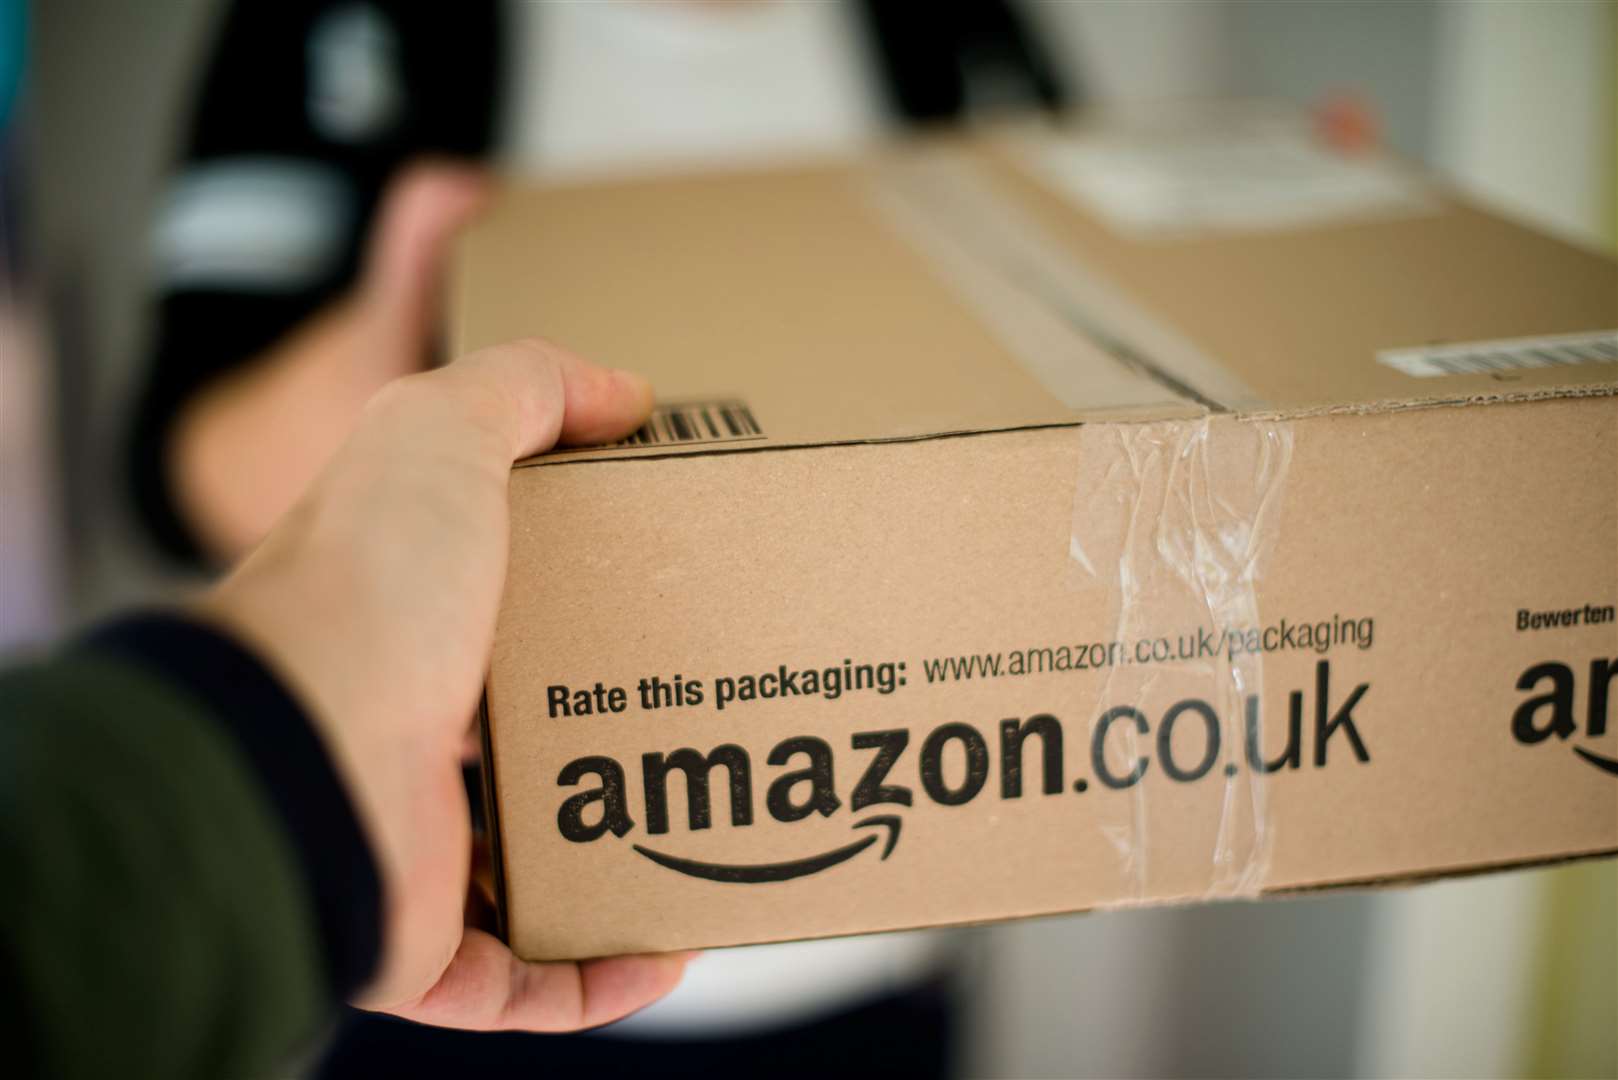 Cottrell spent thousands on goods he ordered on Amazon. Image: iStock